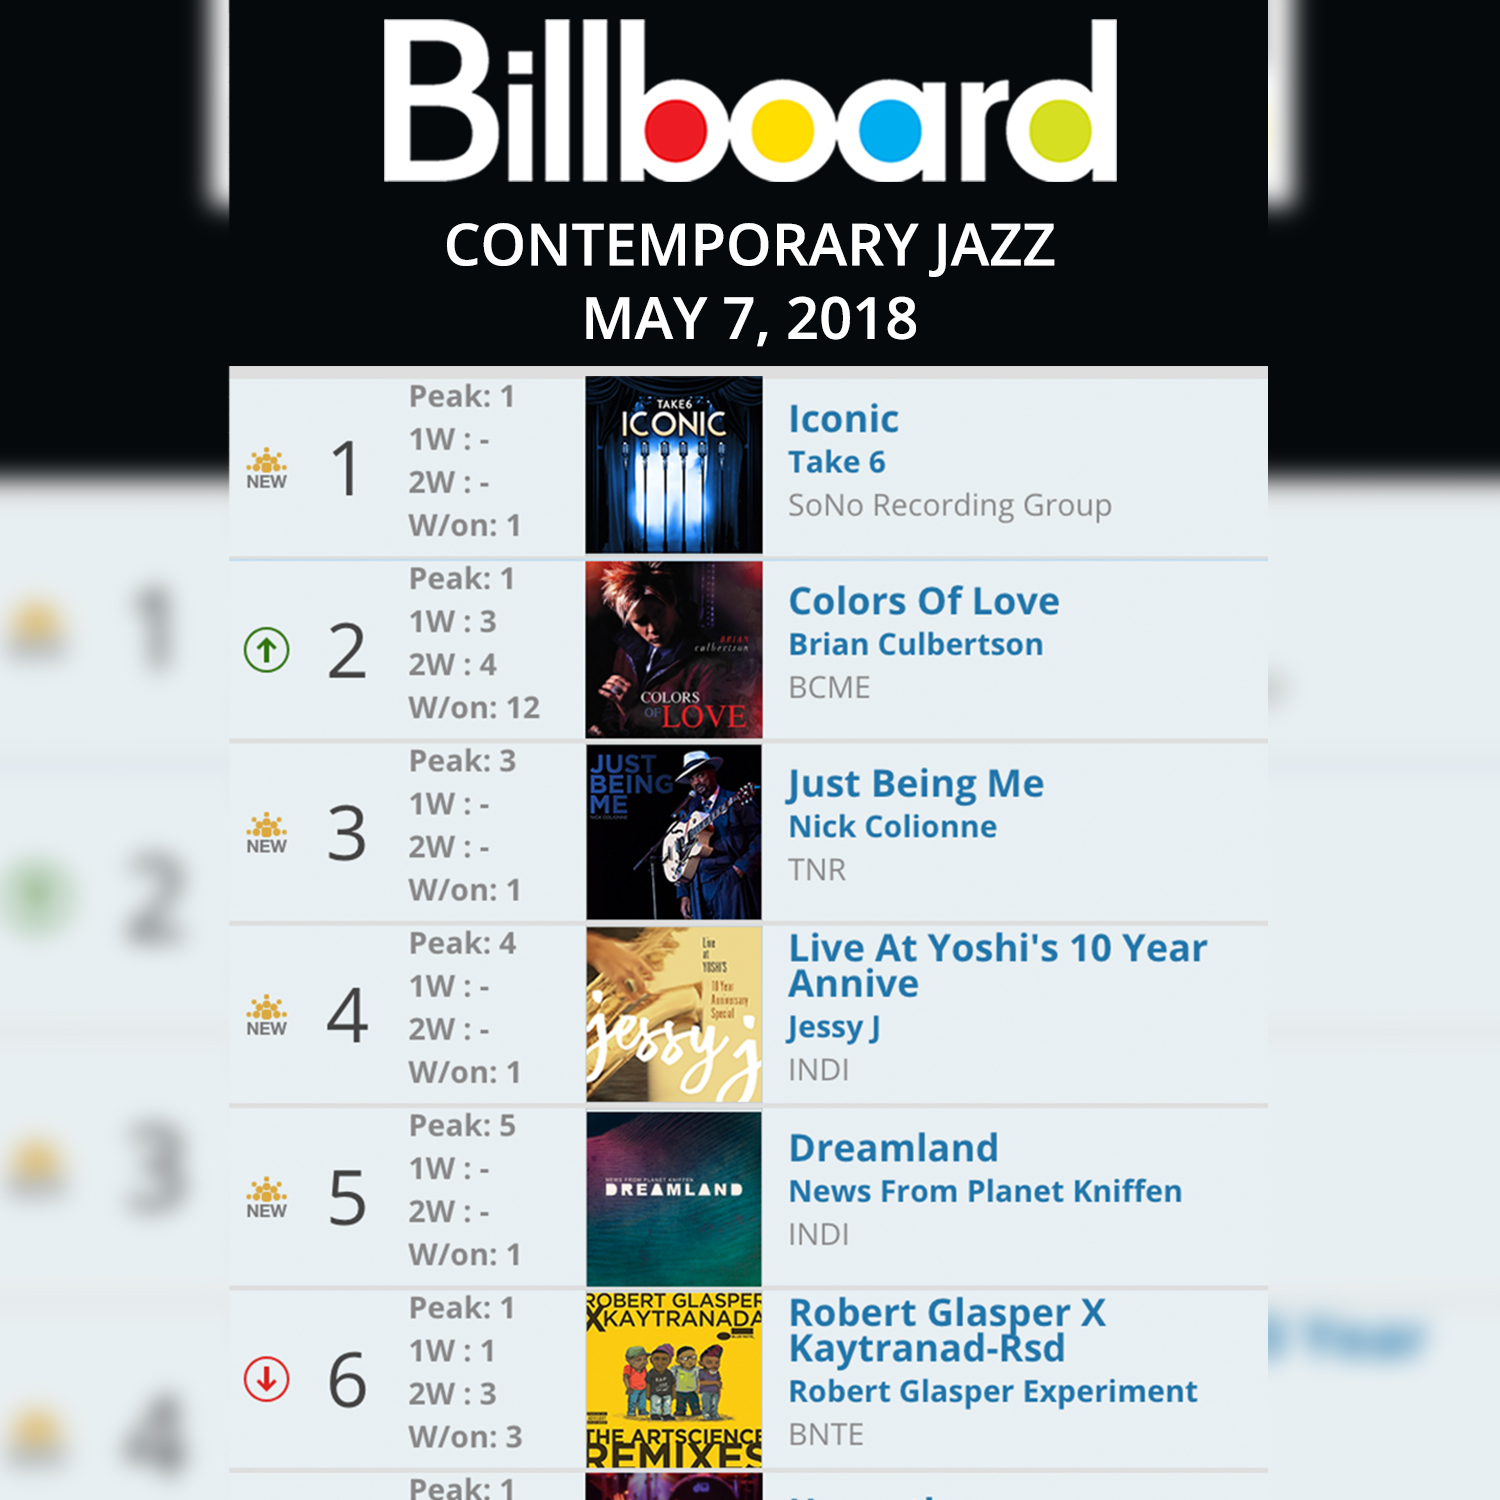 ICONIC Hits #1 the Billboard Contemporary Jazz Chart! - Take6.com - Official Website for 6